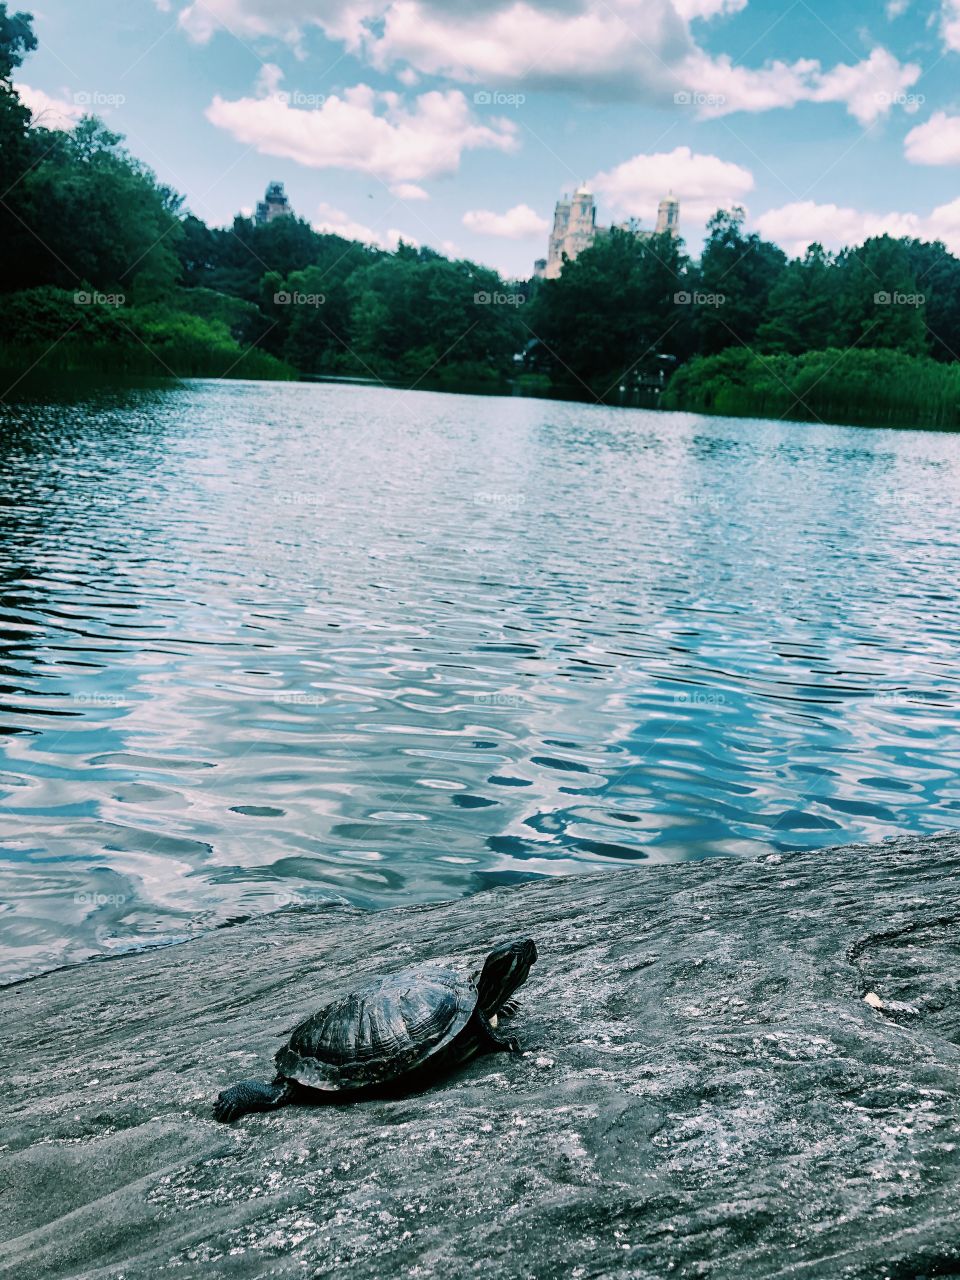 A turtle in the park- Central Park